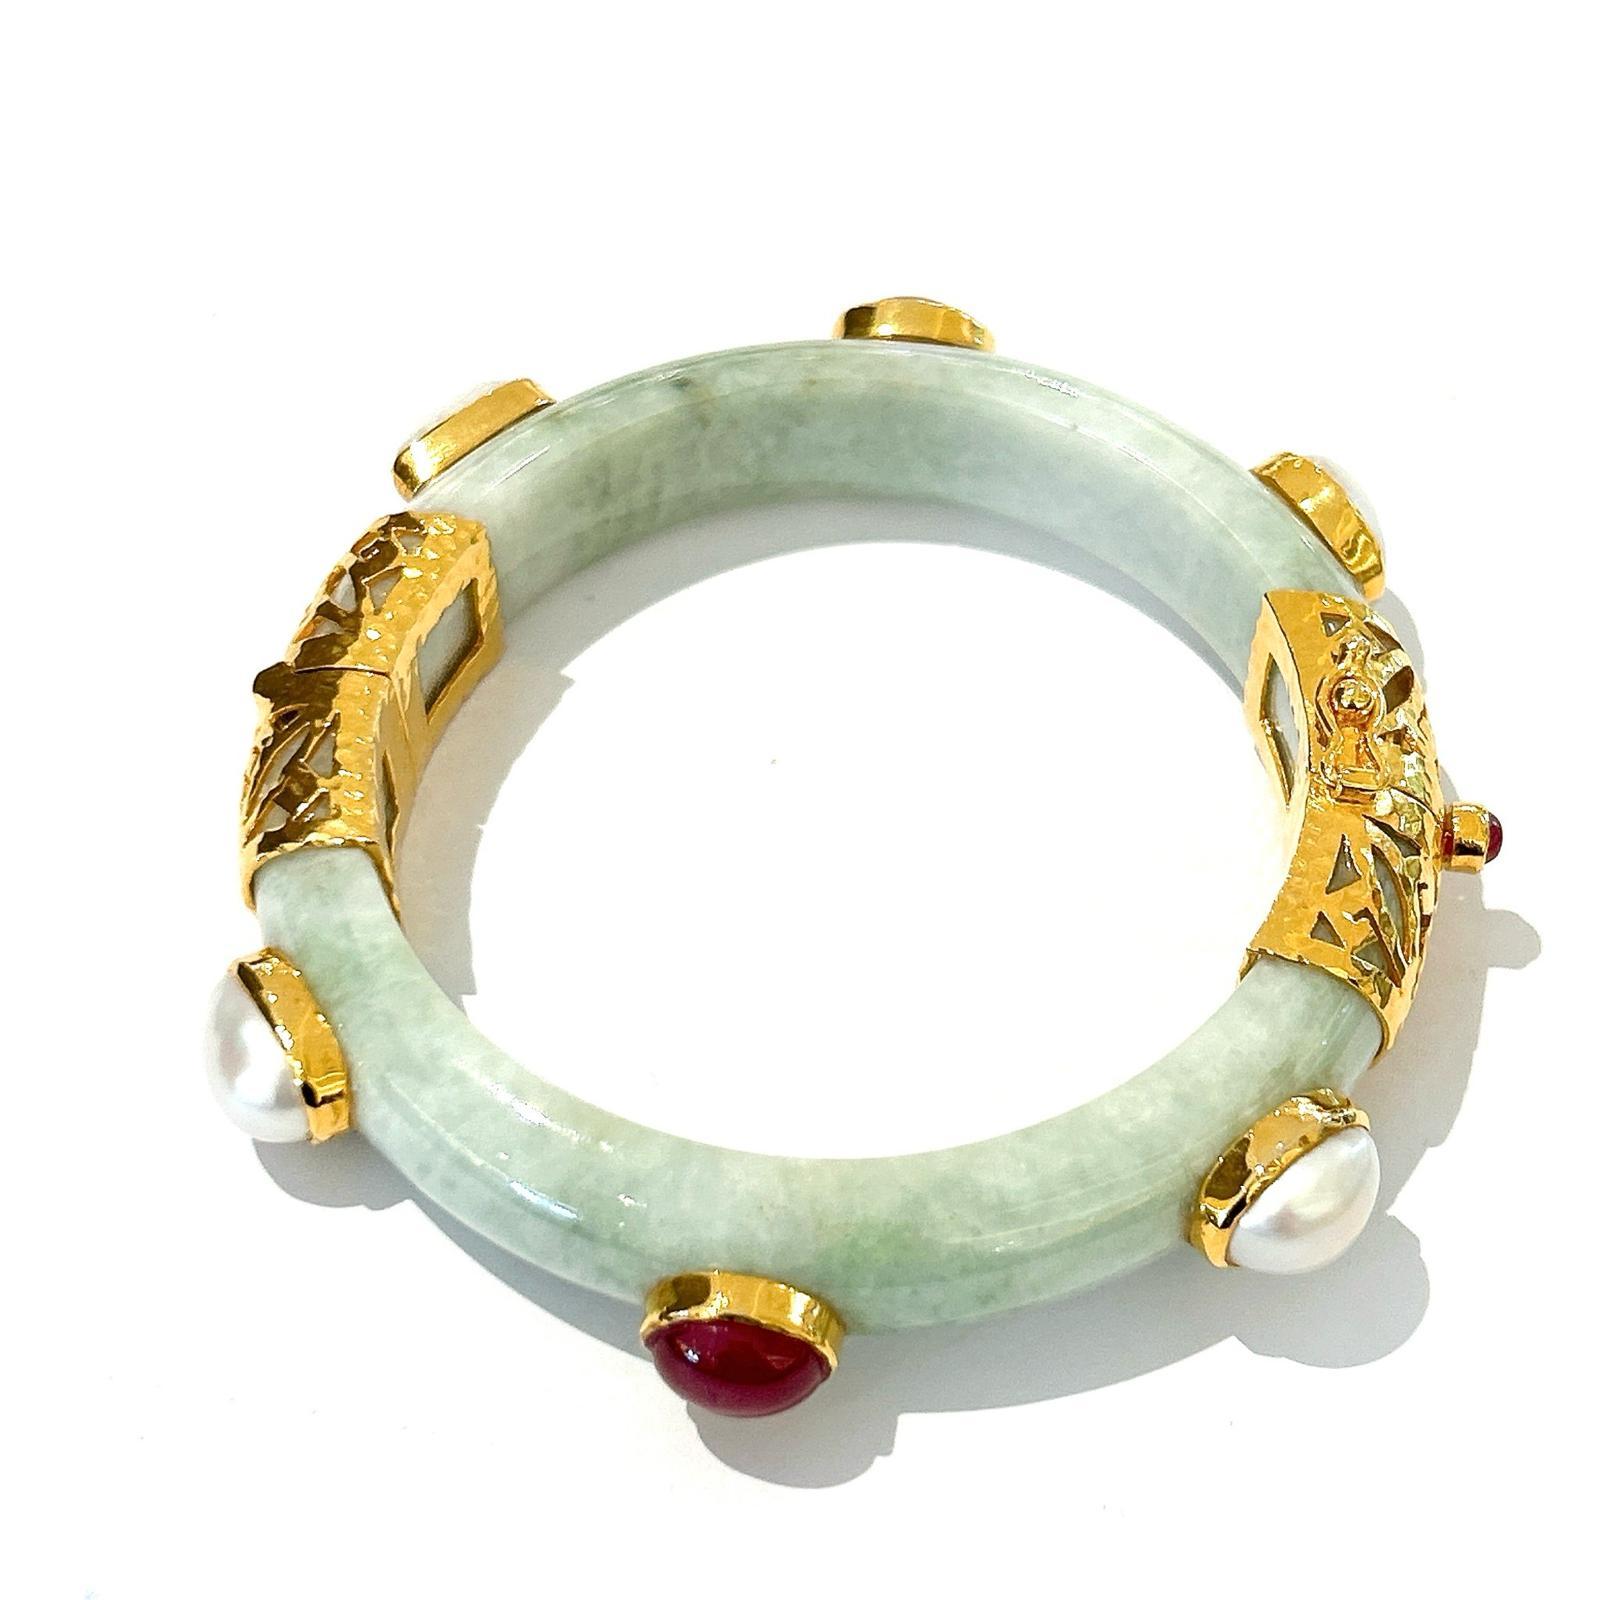 Bochic “Orient” Ruby & Sapphire Vintage Jade Bangle Set In 18K Gold & Silver 

Natural red rubies - 4 Carats 
Natural Blue sapphires - 4 Carats
Vintage Mint Green Jade 

The bangle has an open and close hinge 

This bangle is from the 